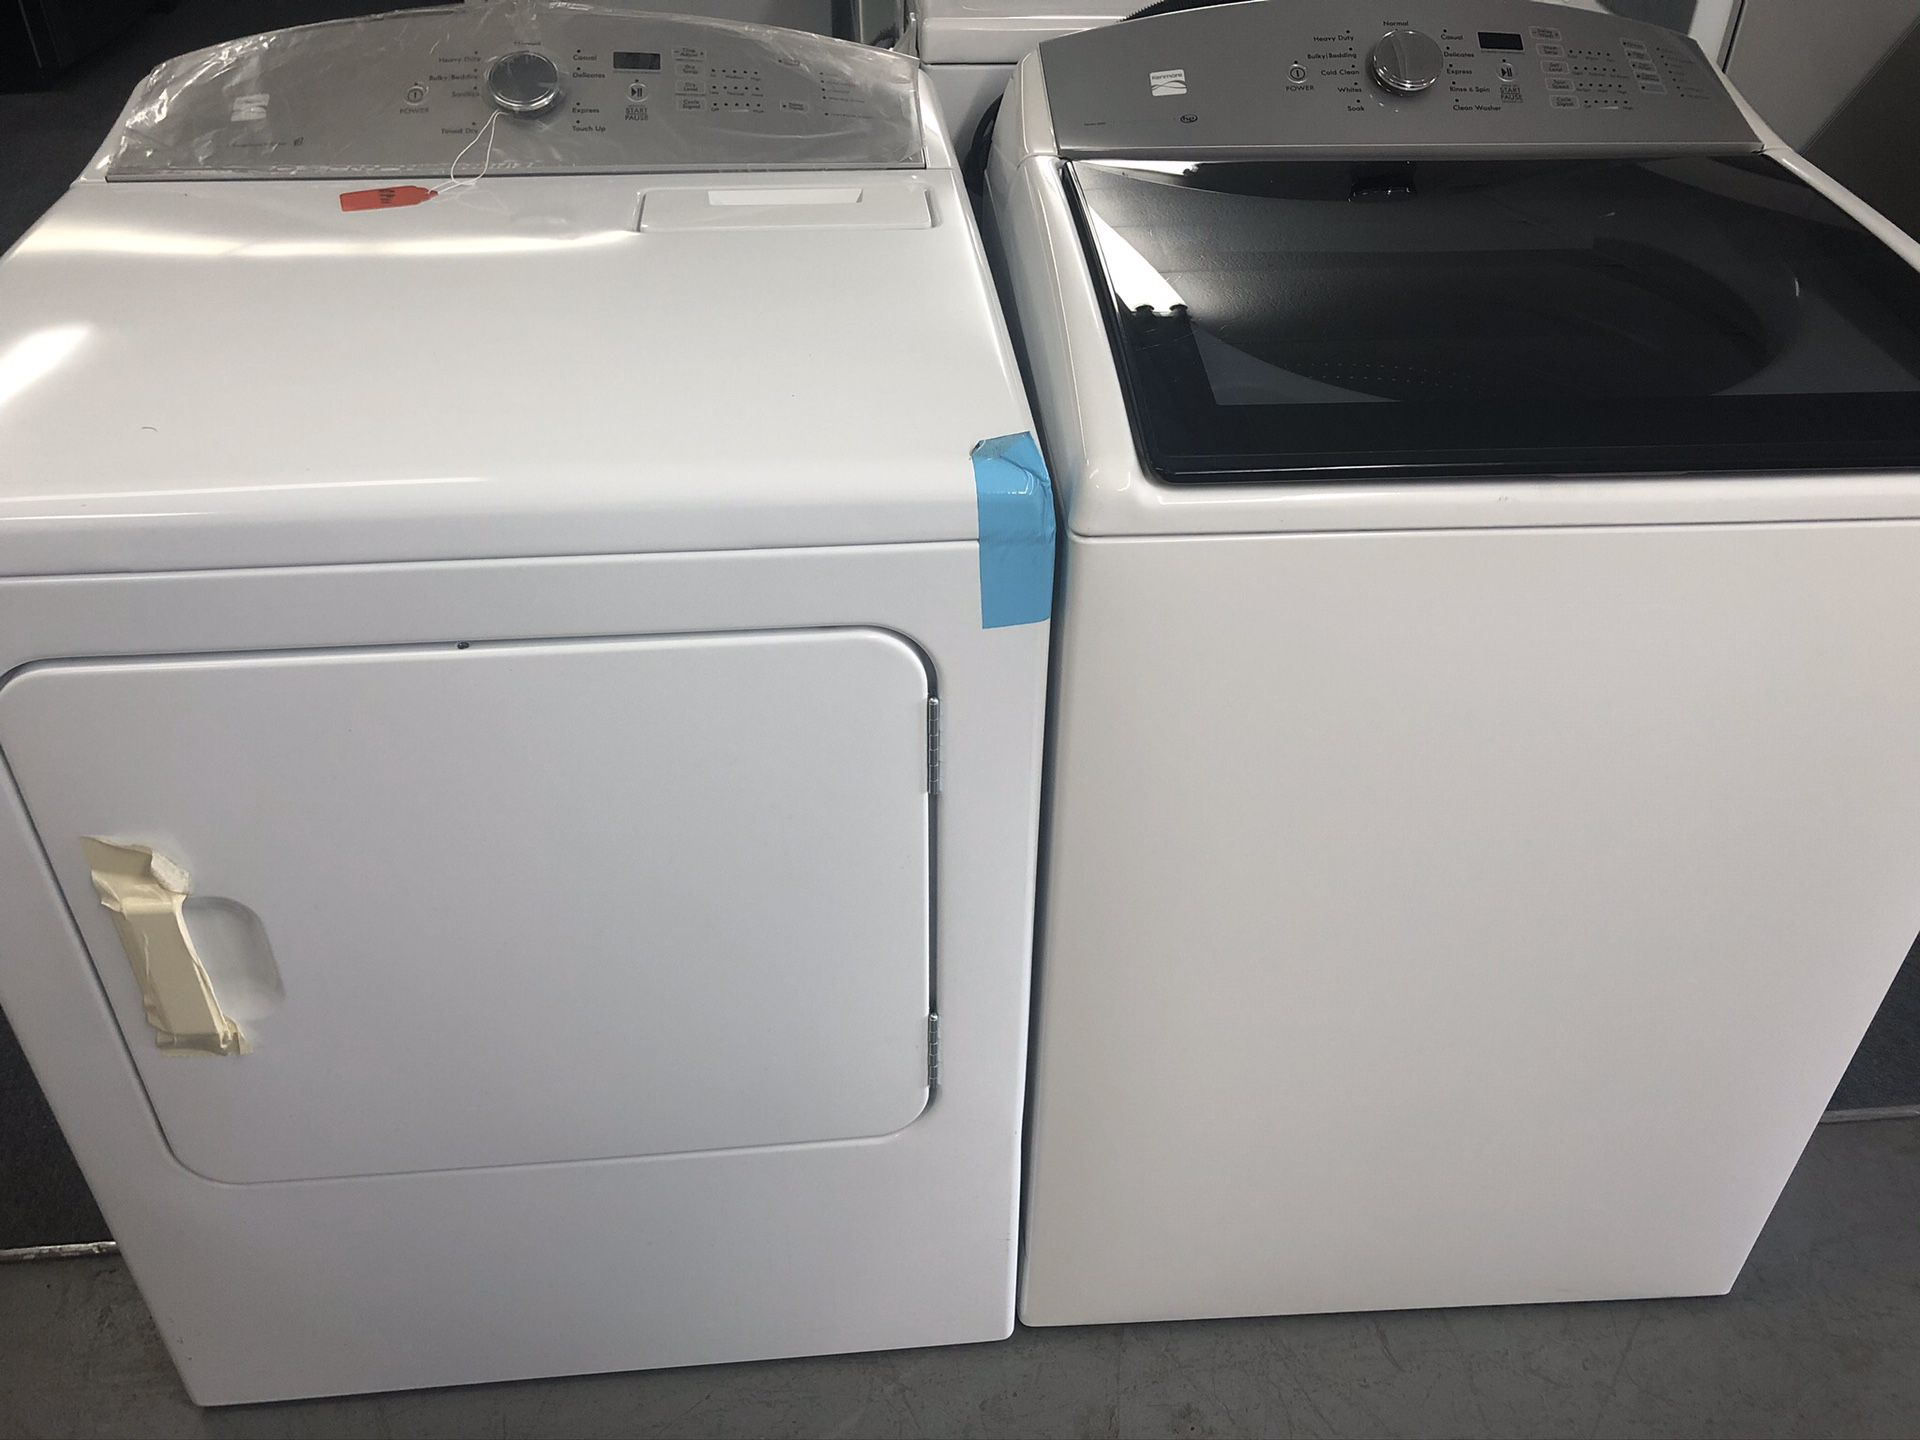 New scratch and dent kenmore 600 series washer and dryer set. 1 year warranty